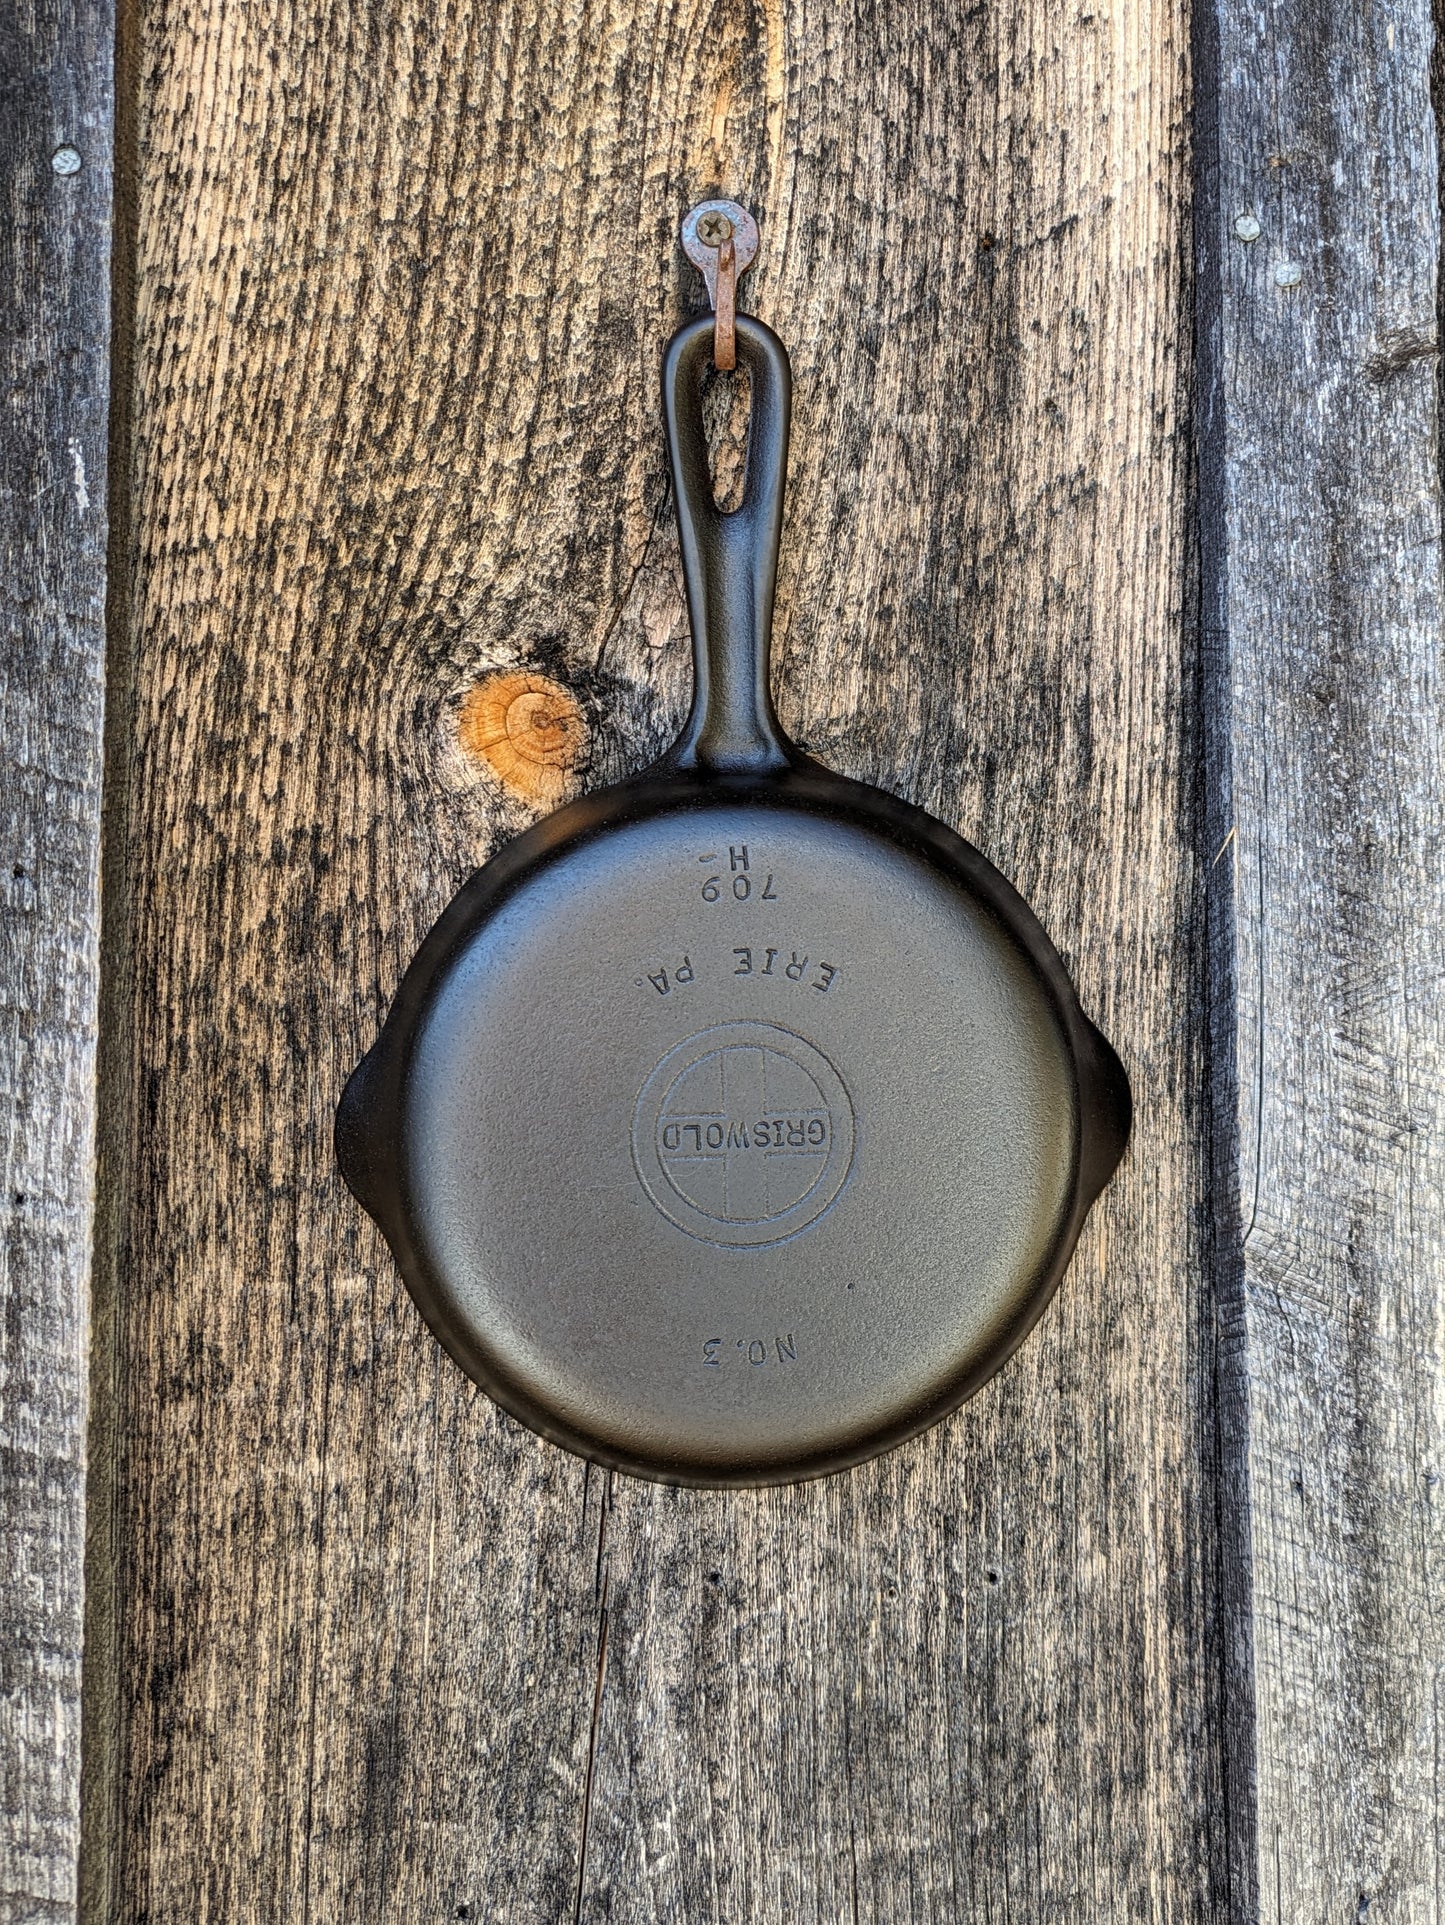 Griswold Small Block Logo #3 Cast Iron Skillet 709 H Grooved Handle